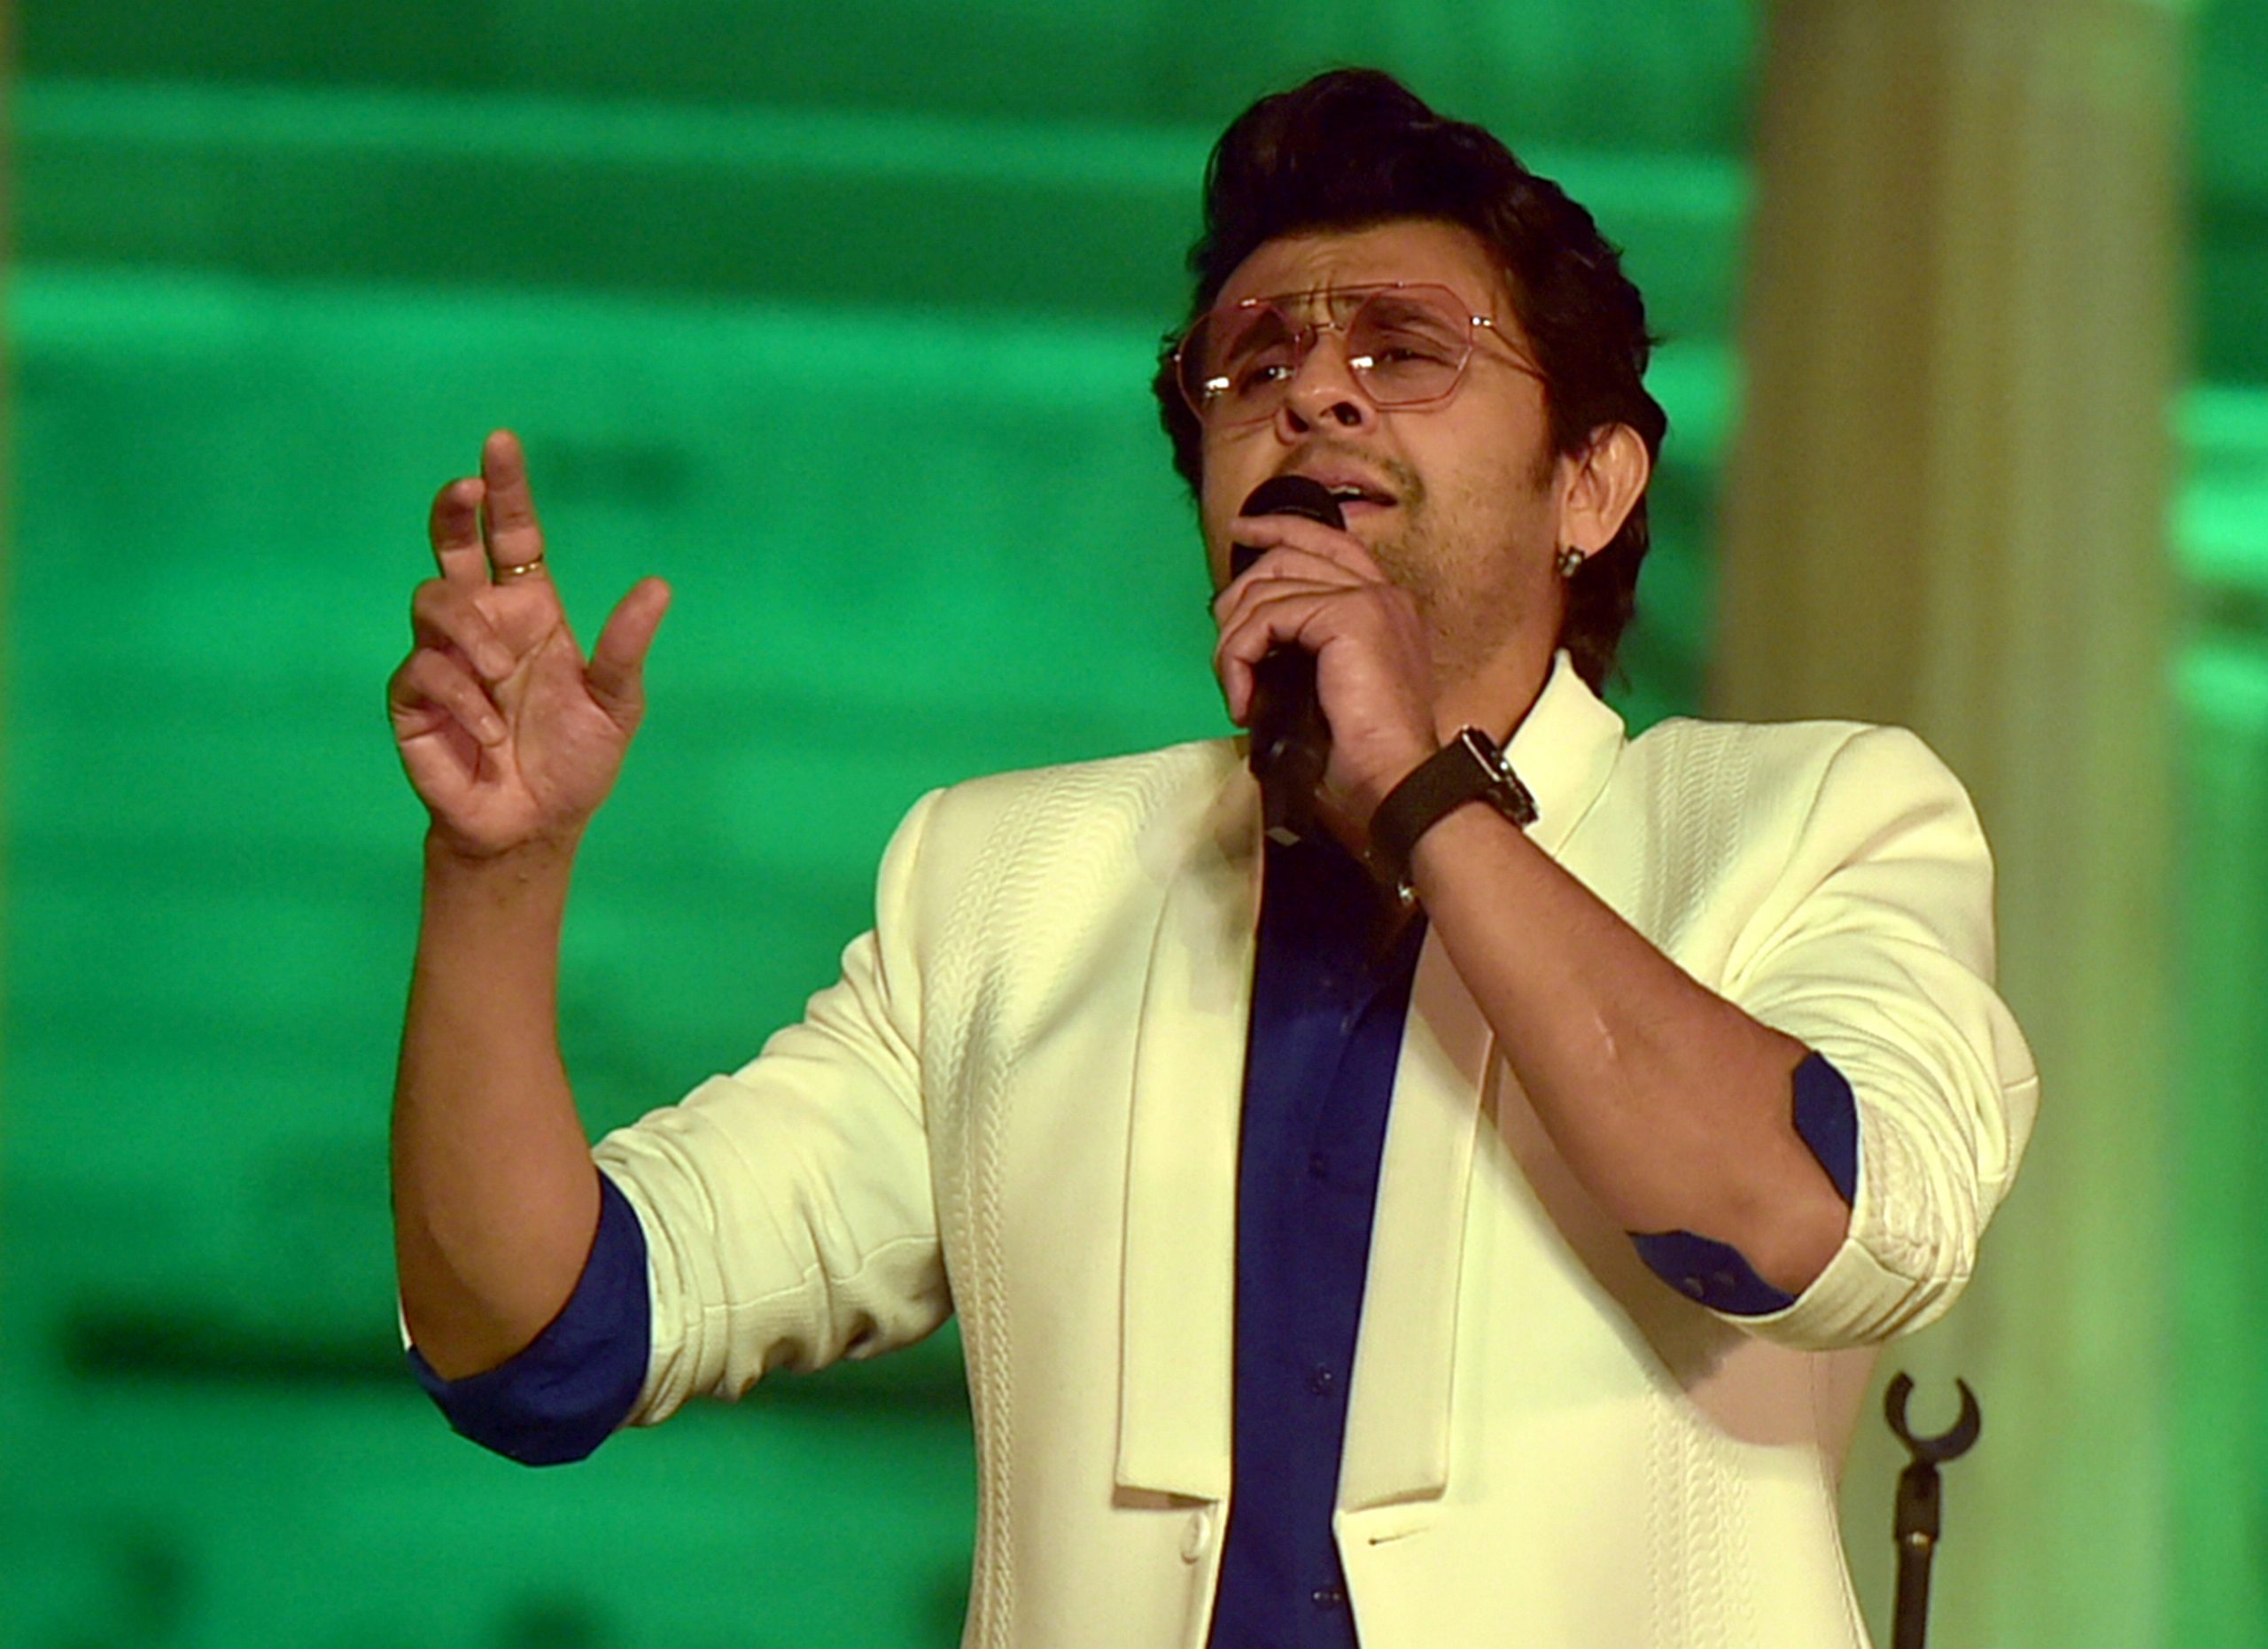 Sonu Nigam revives fears of Hindi imposition threatening India’s pluralism